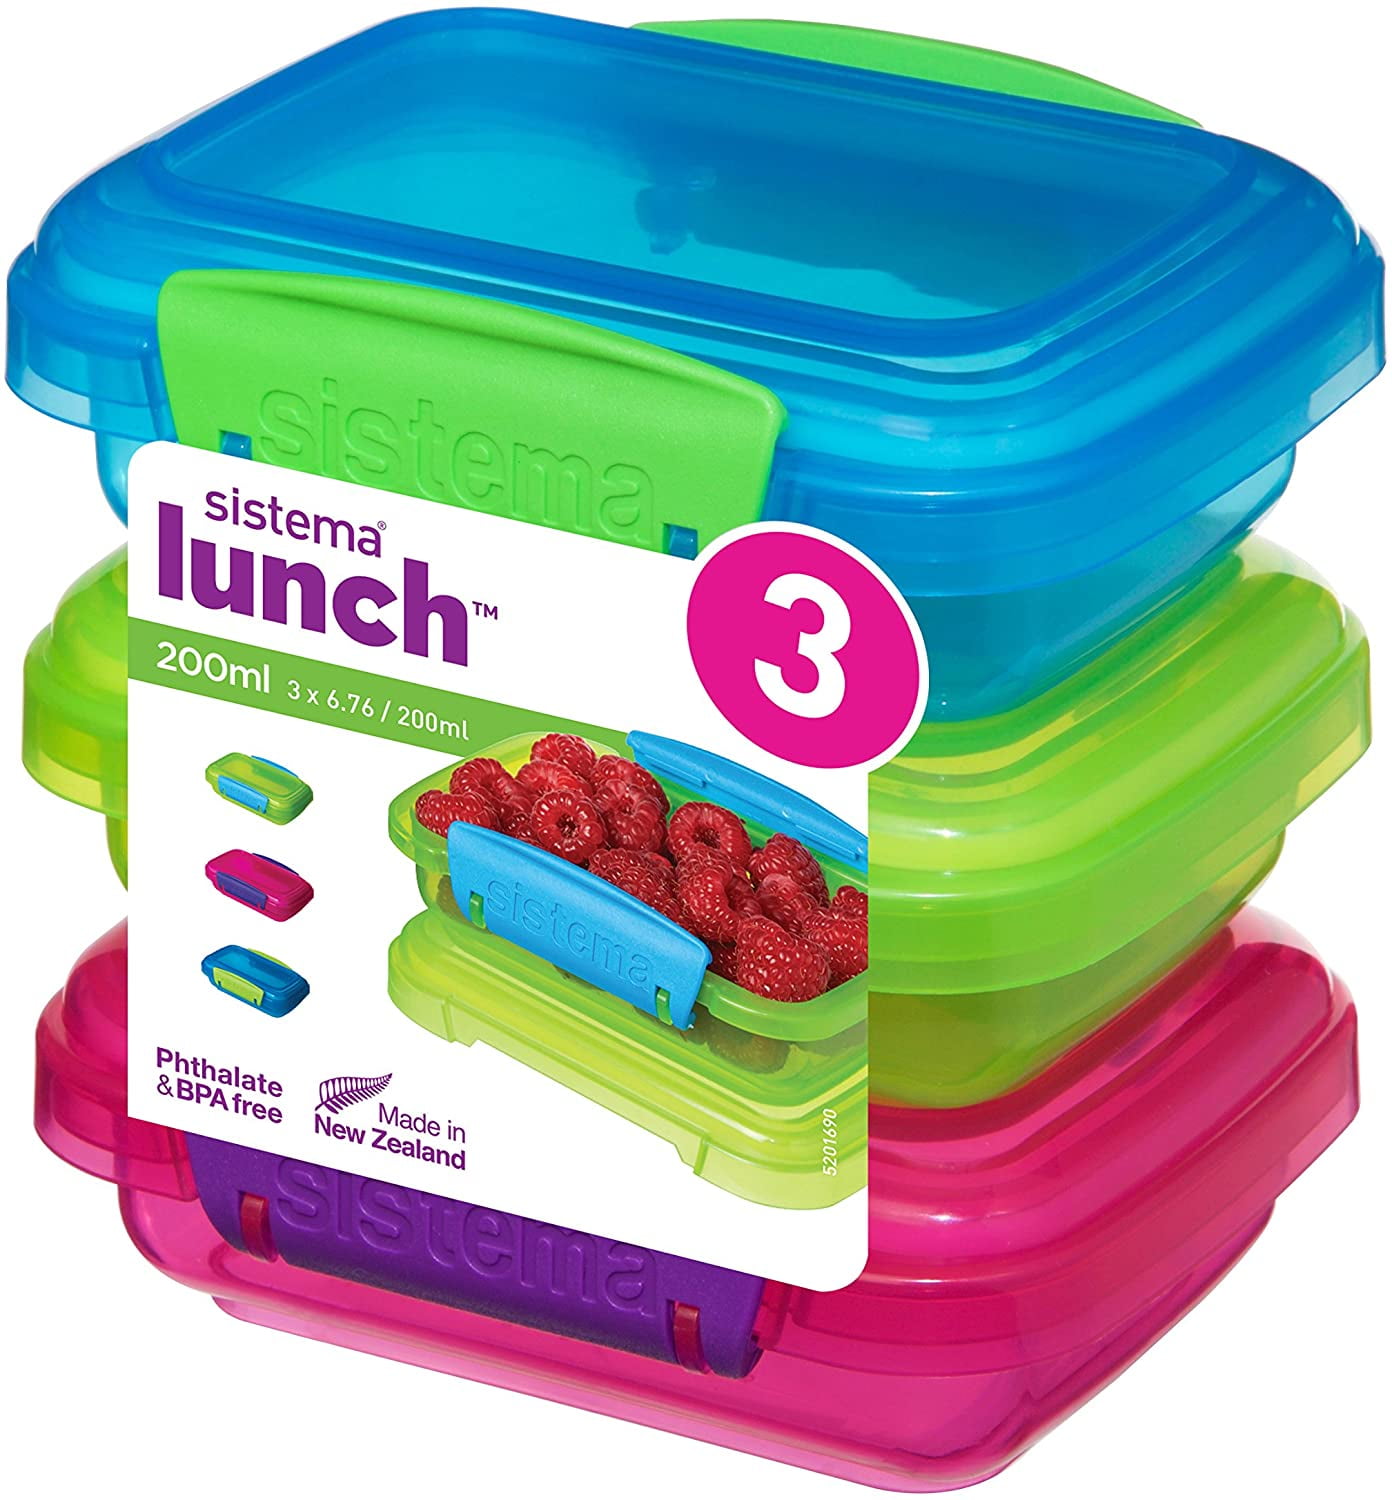  Sistema 3-Piece Sandwhich Containers for Lunch Boxes and Meal  Prep, Dishwasher Safe, 1.9-Cup, Blue/Green/Pink: Home & Kitchen